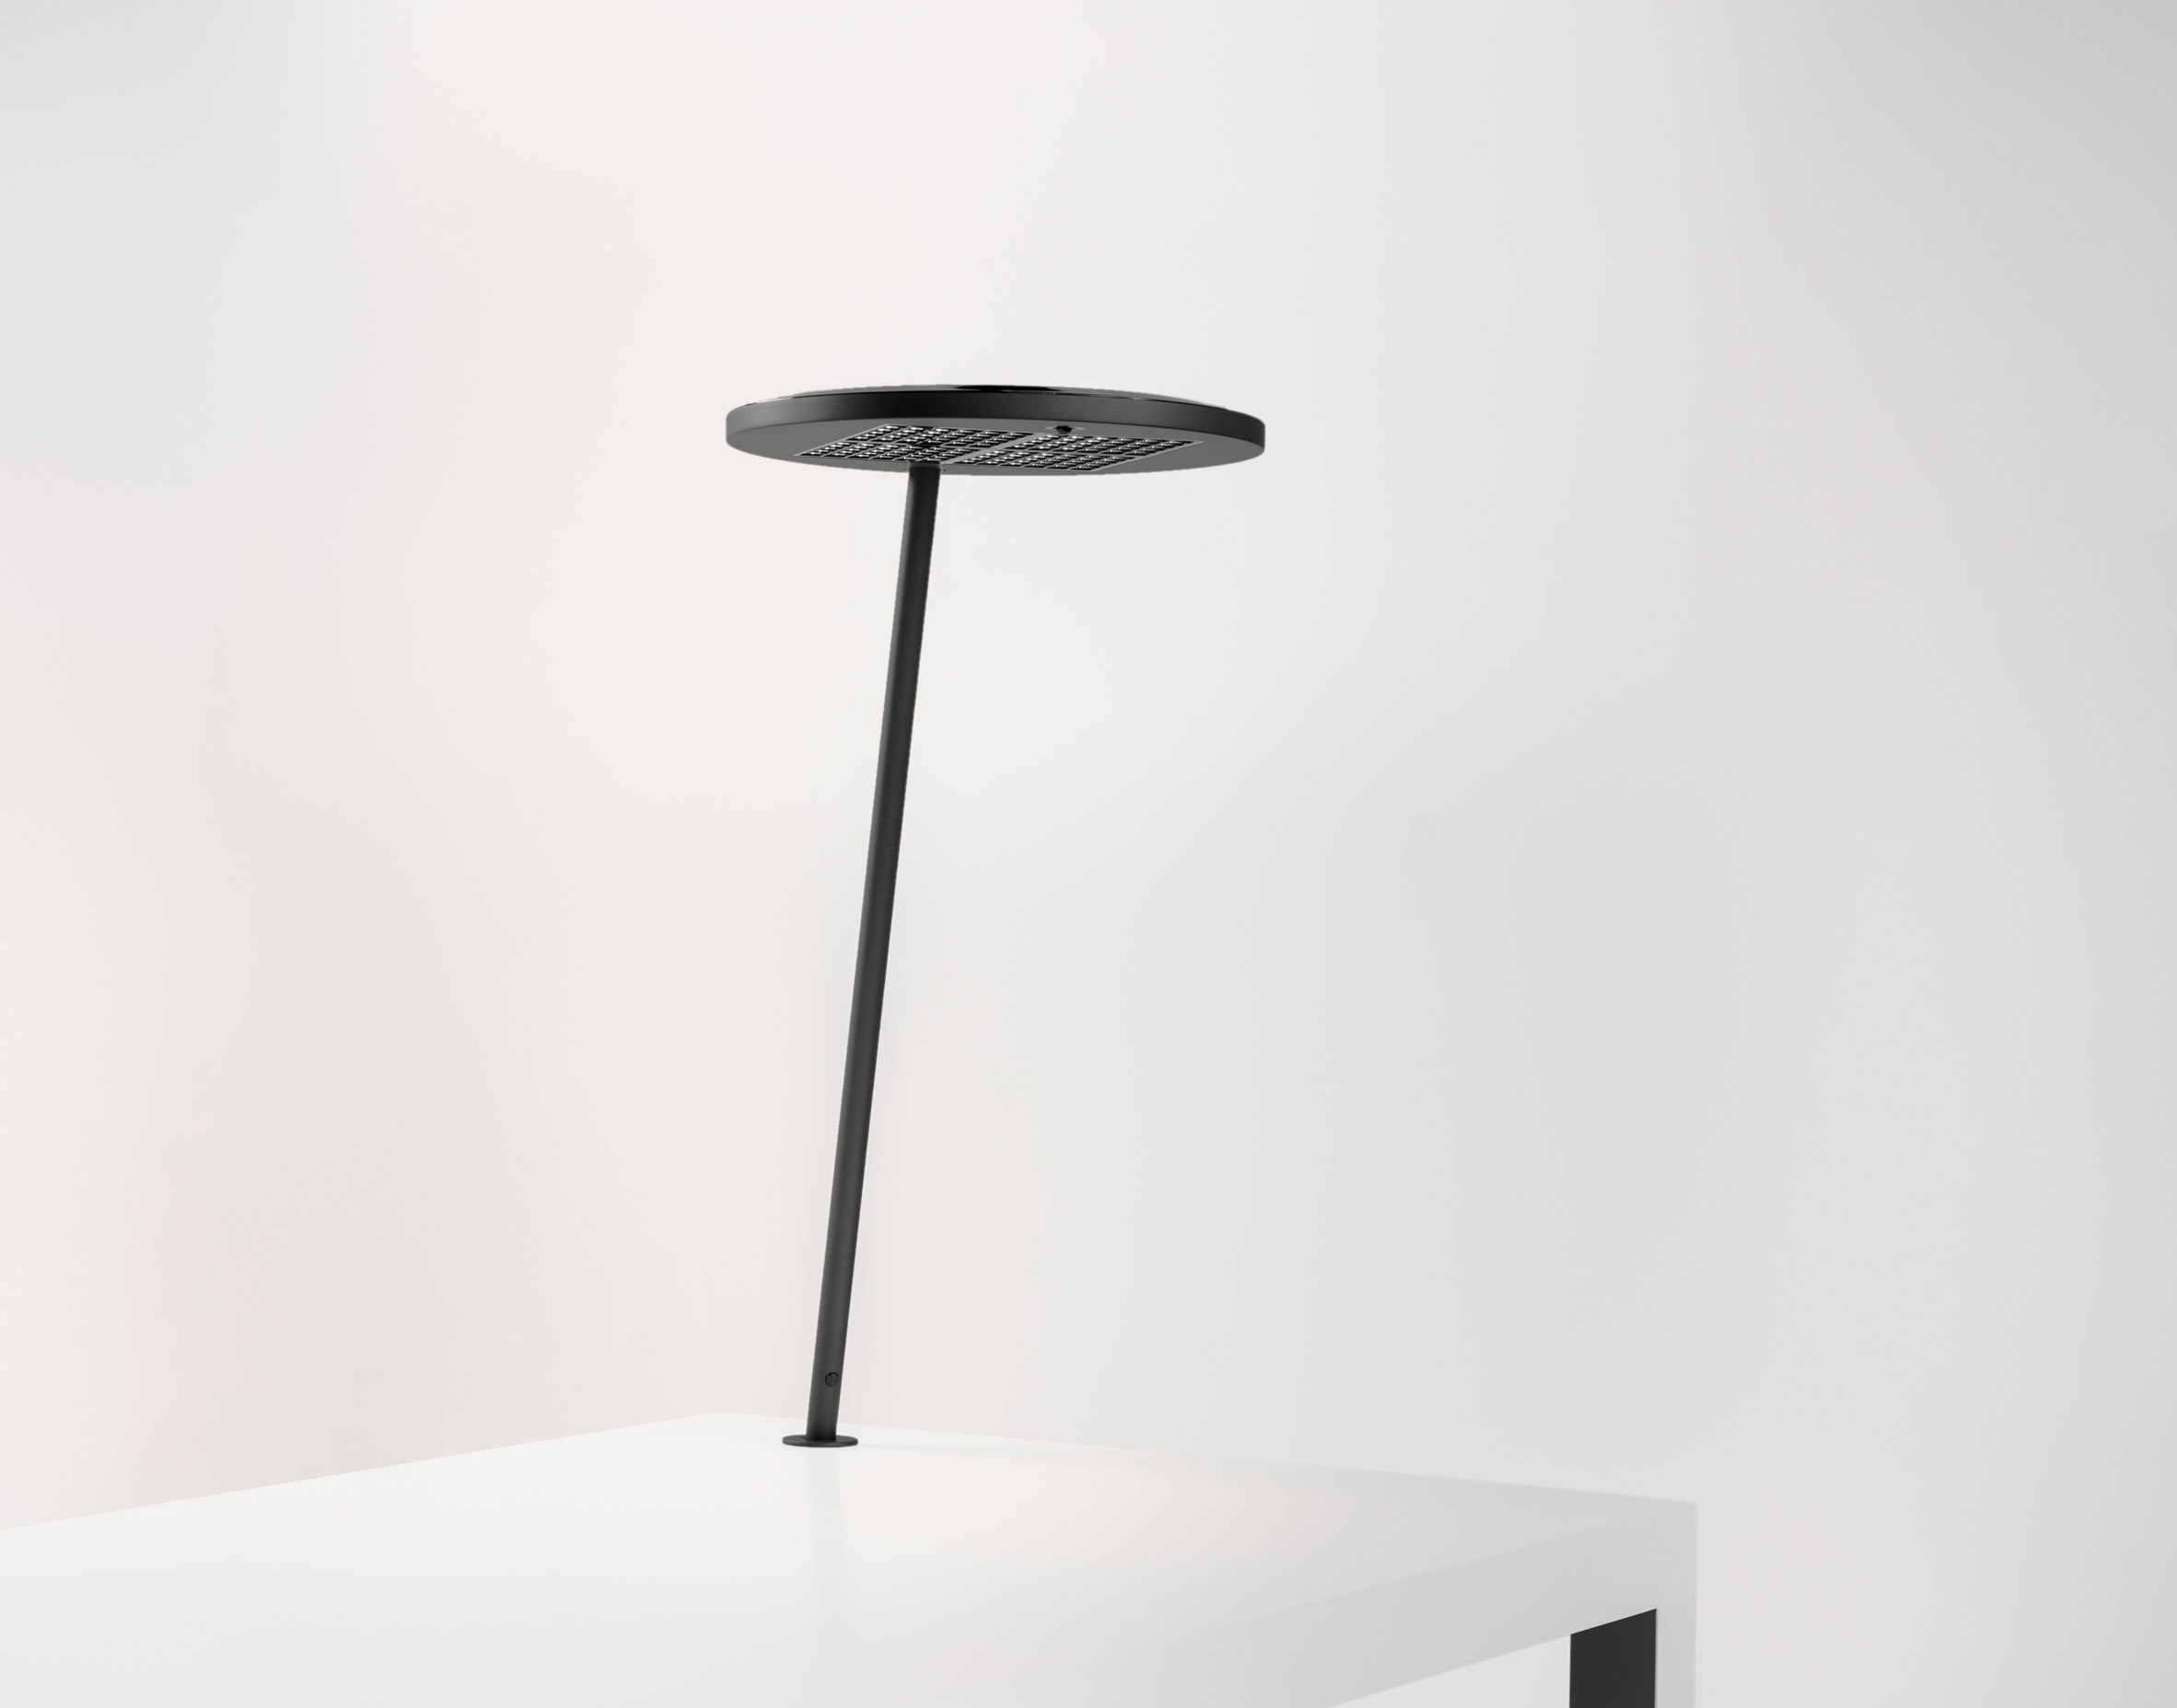 Tobias Grau marks 20th anniversary with collection of minimal table lamps